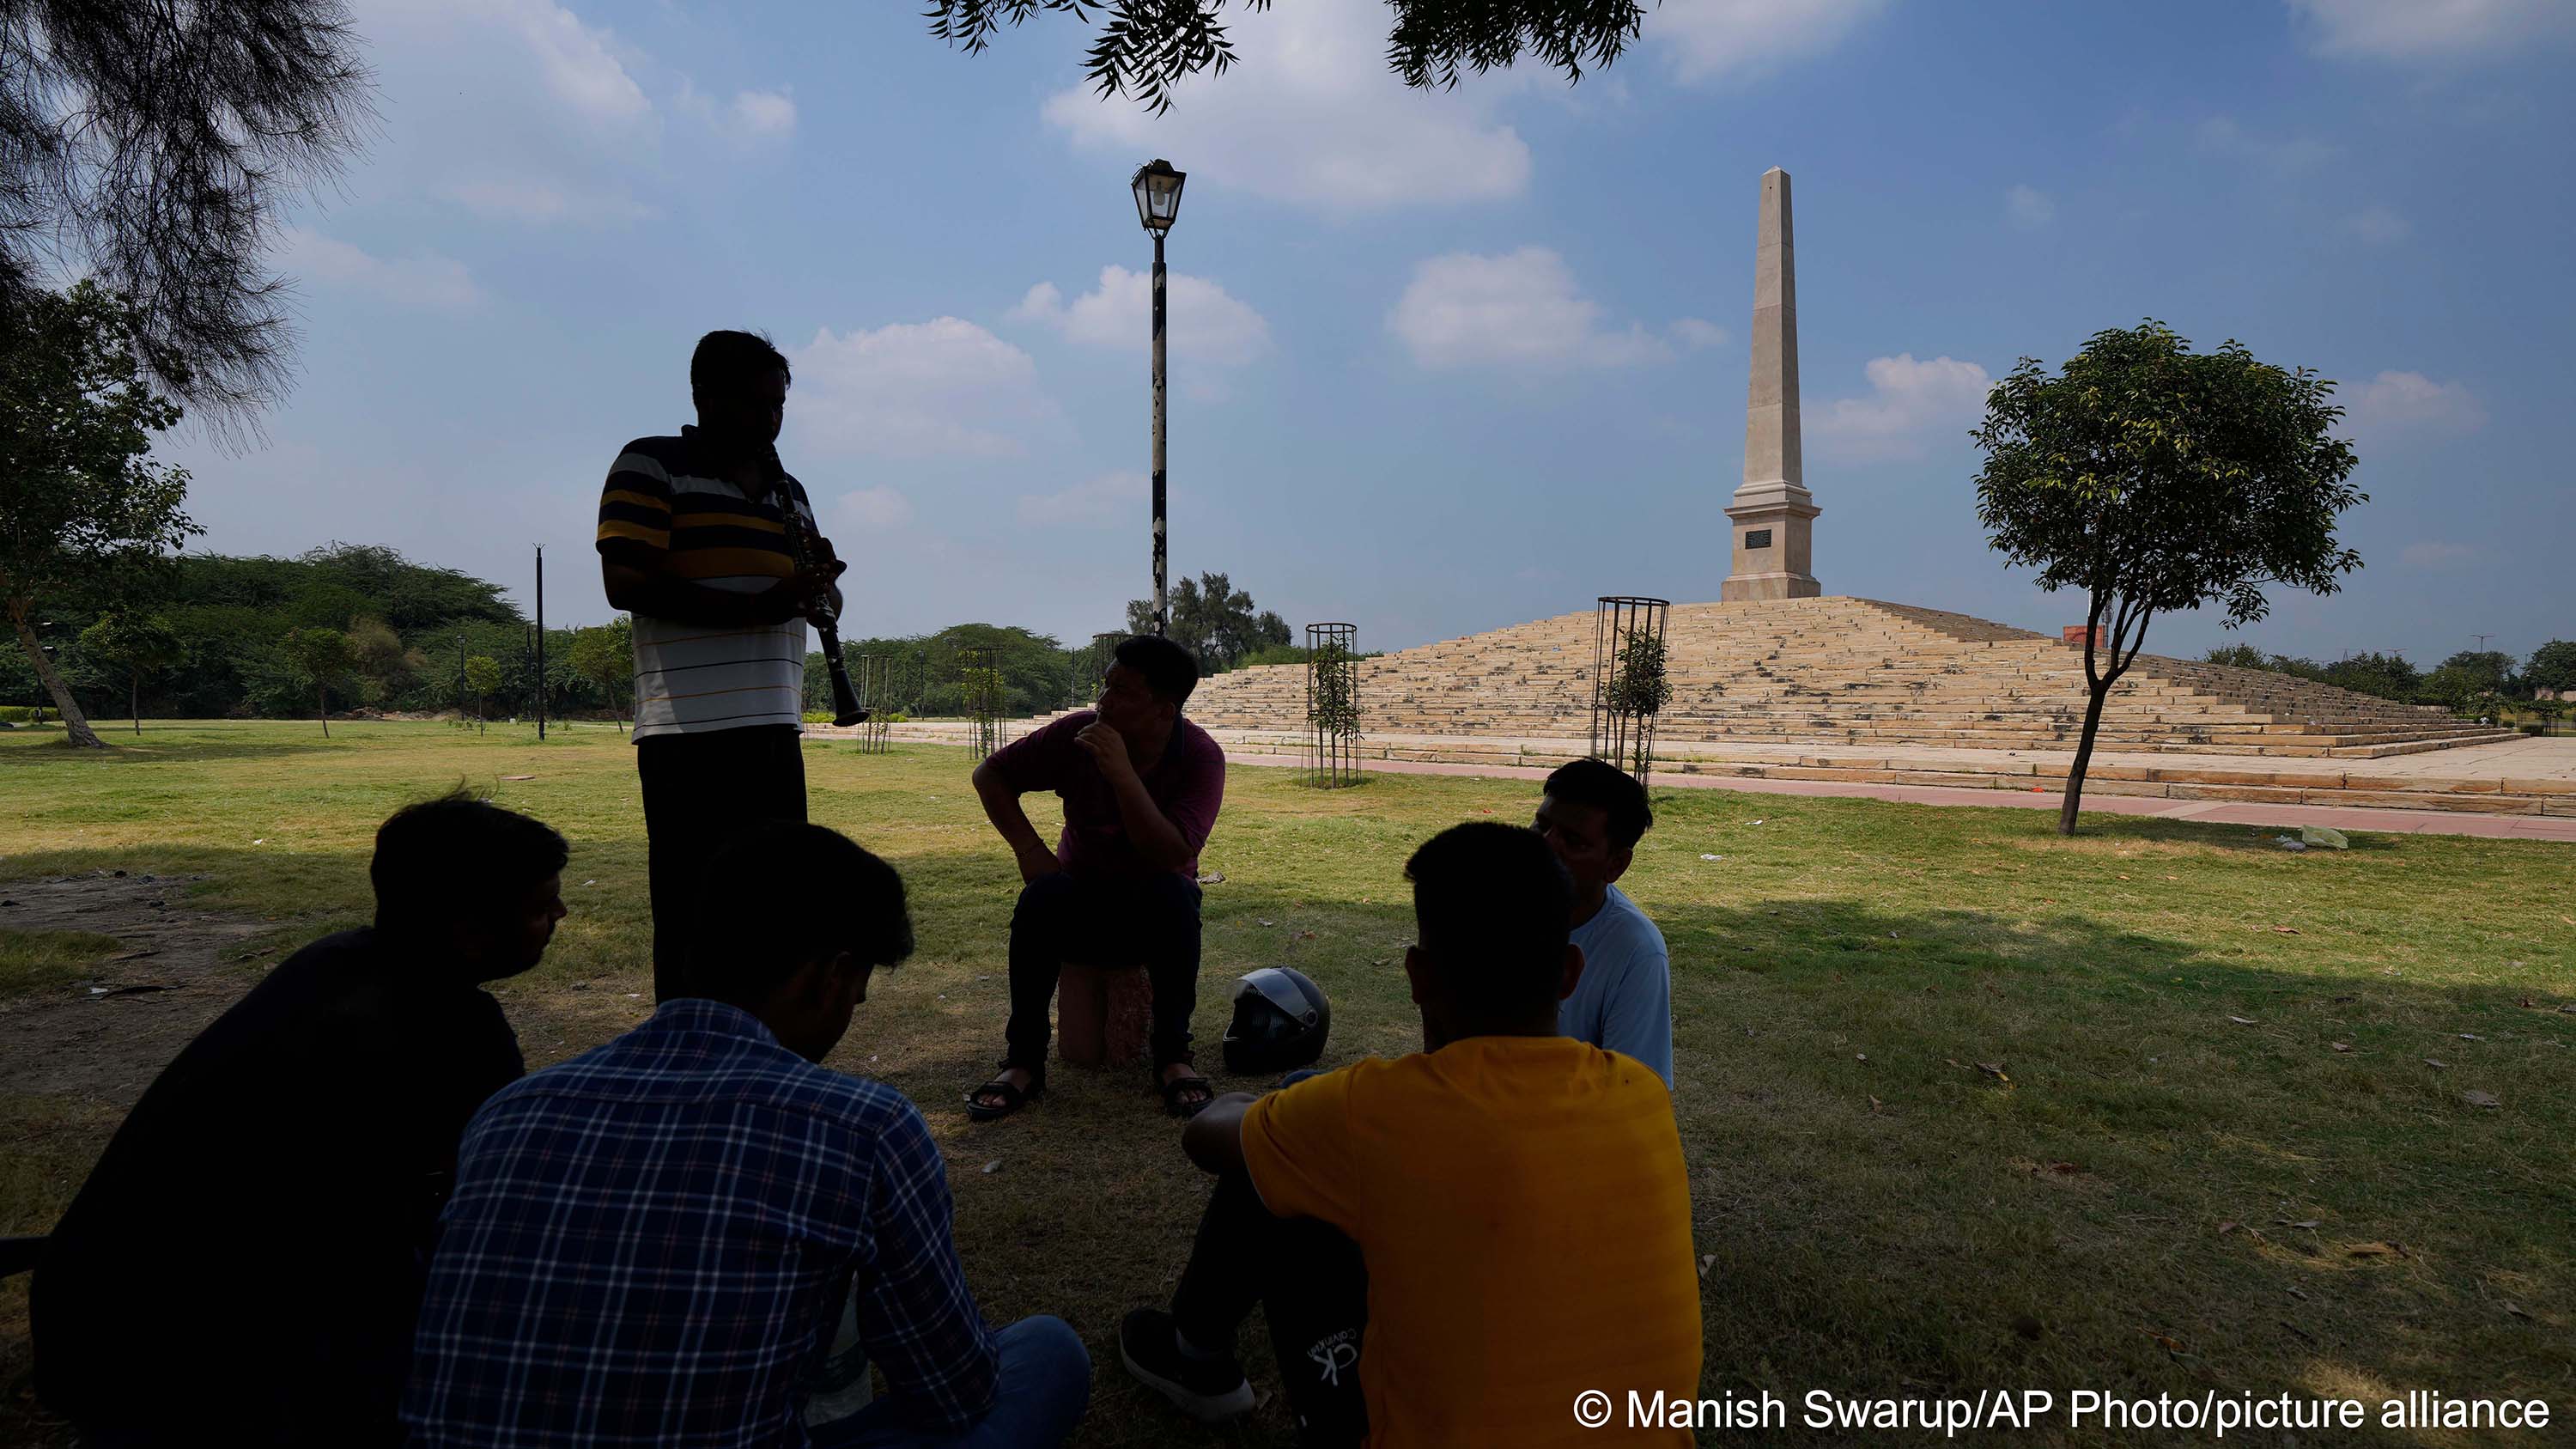 A group of band players practise in front of Proclamation tower at the Coronation Park, which houses statues of old British Kings and rulers in New Delhi, 11 September 2022 (photo: AP Photo/Manish Swarup)